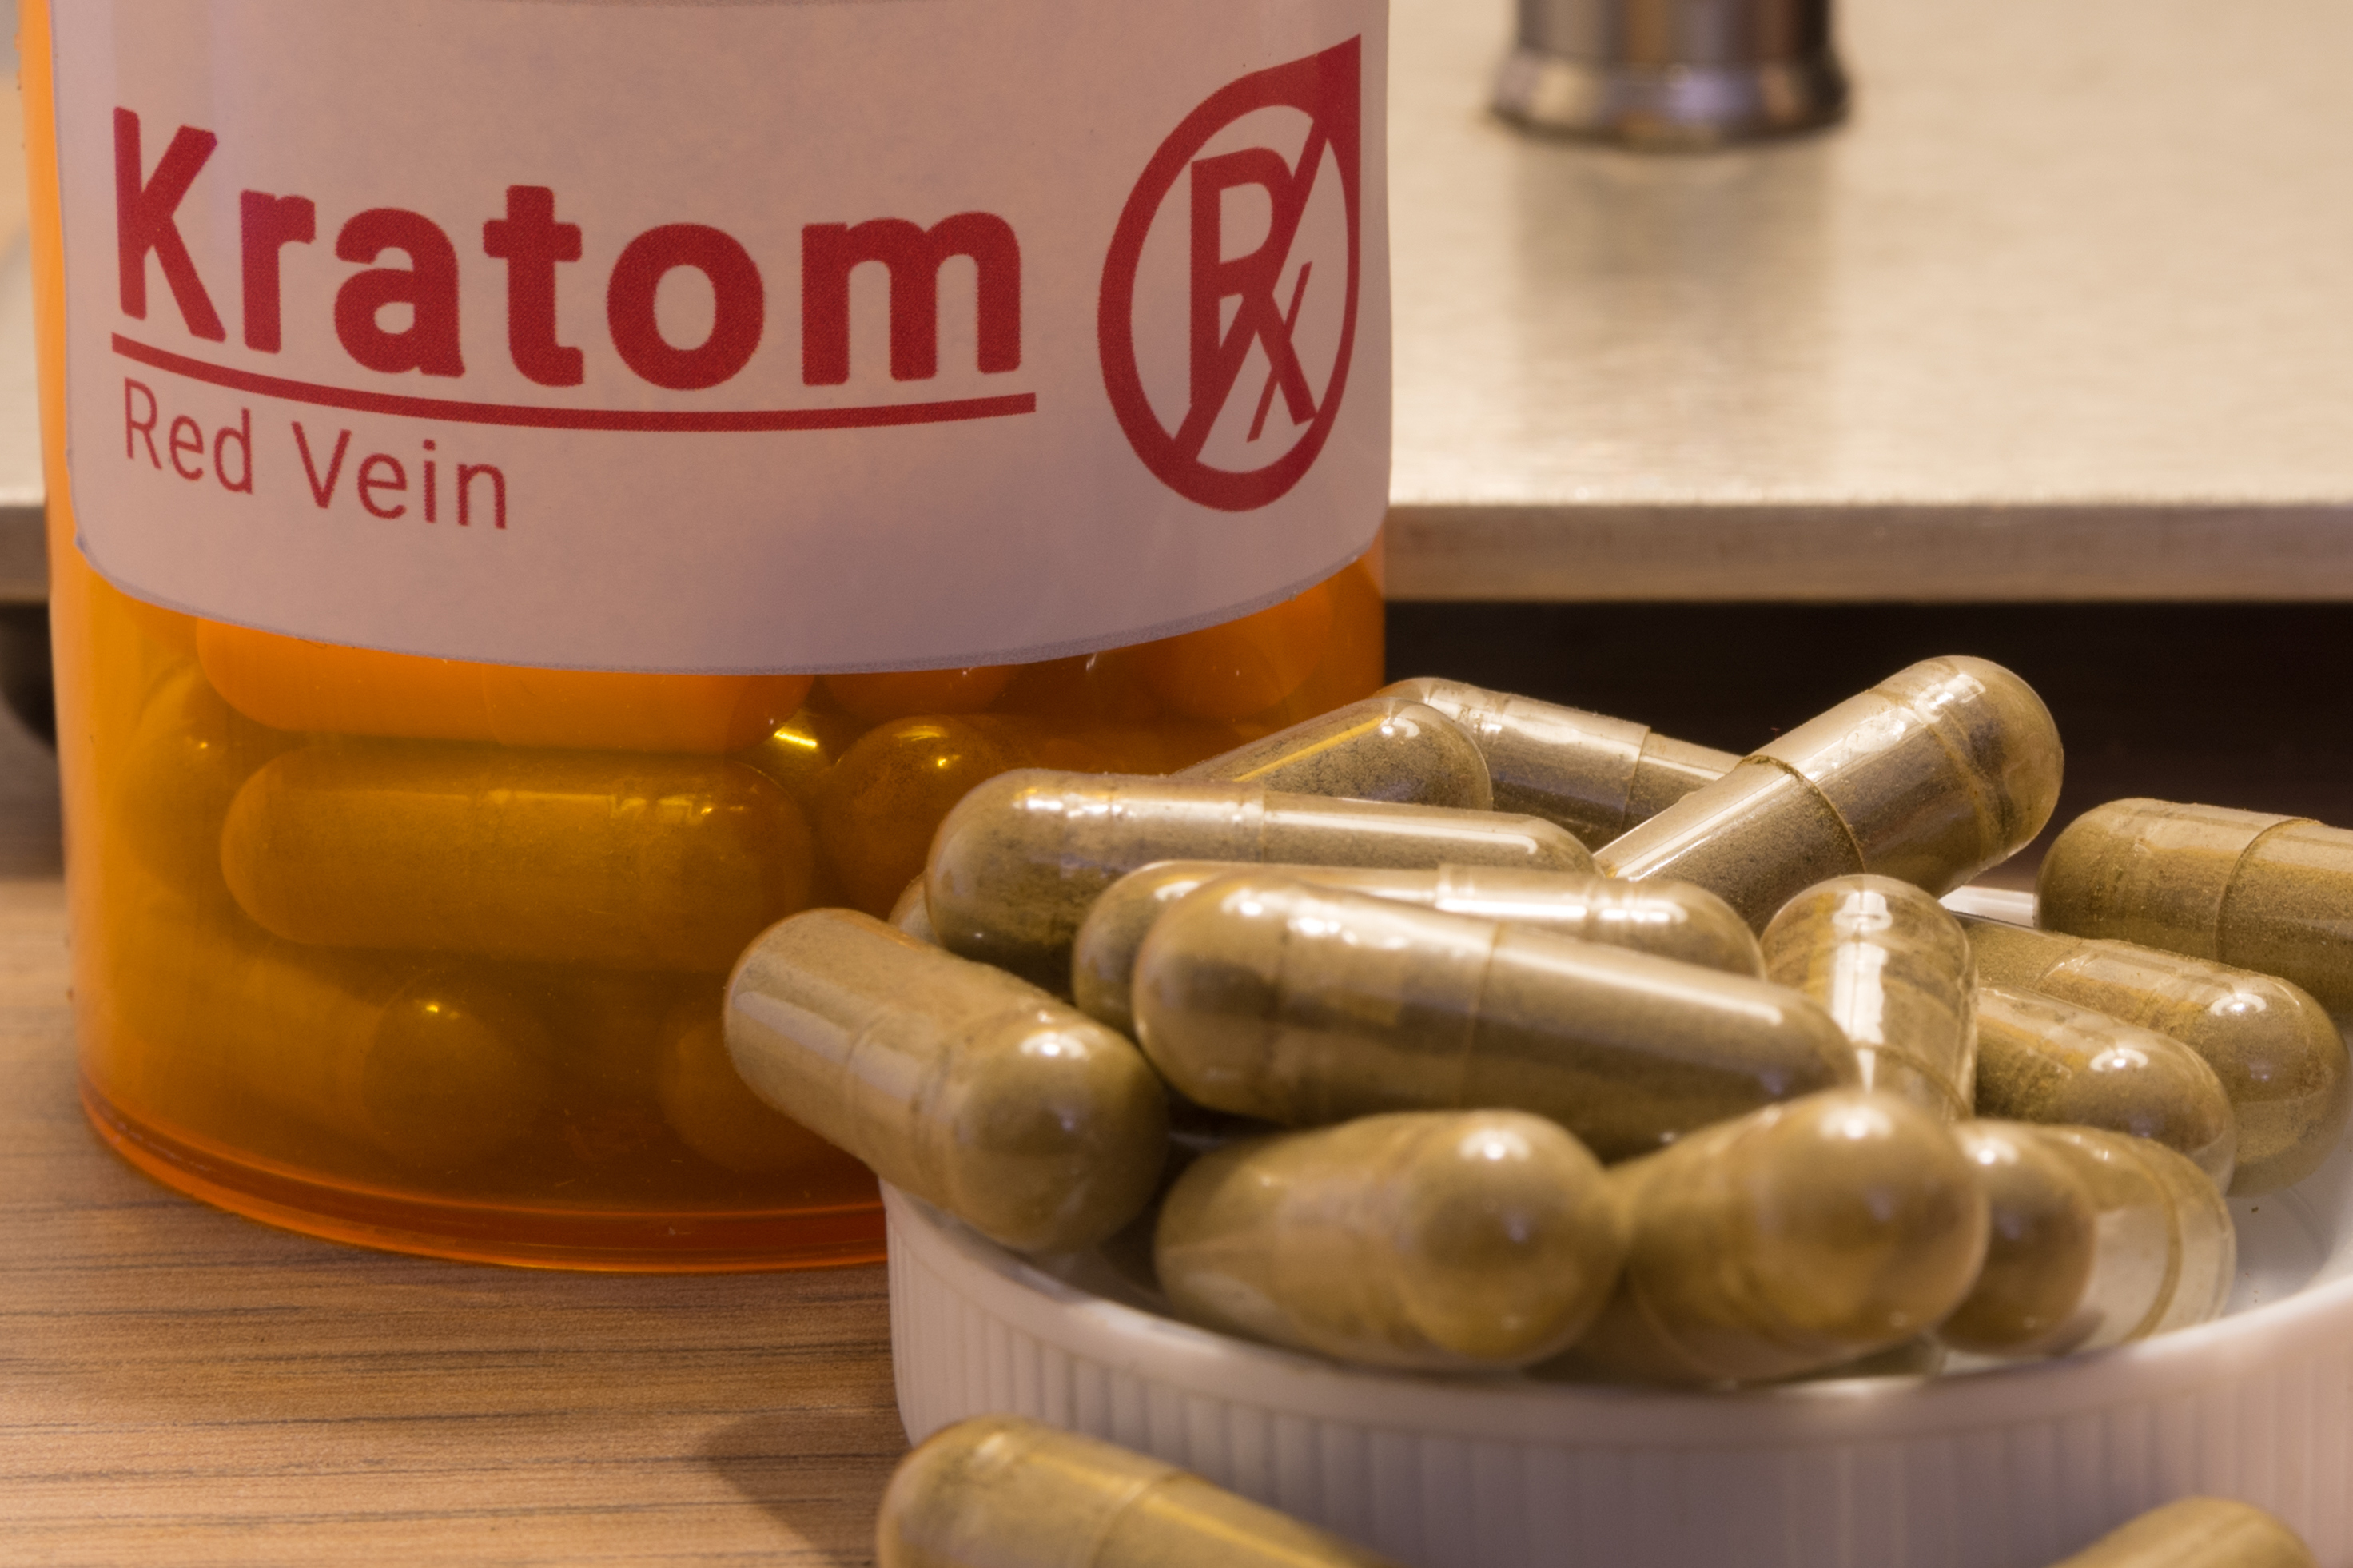 Image of actual kratom pills with a faux prescription logo. (Getty Images)